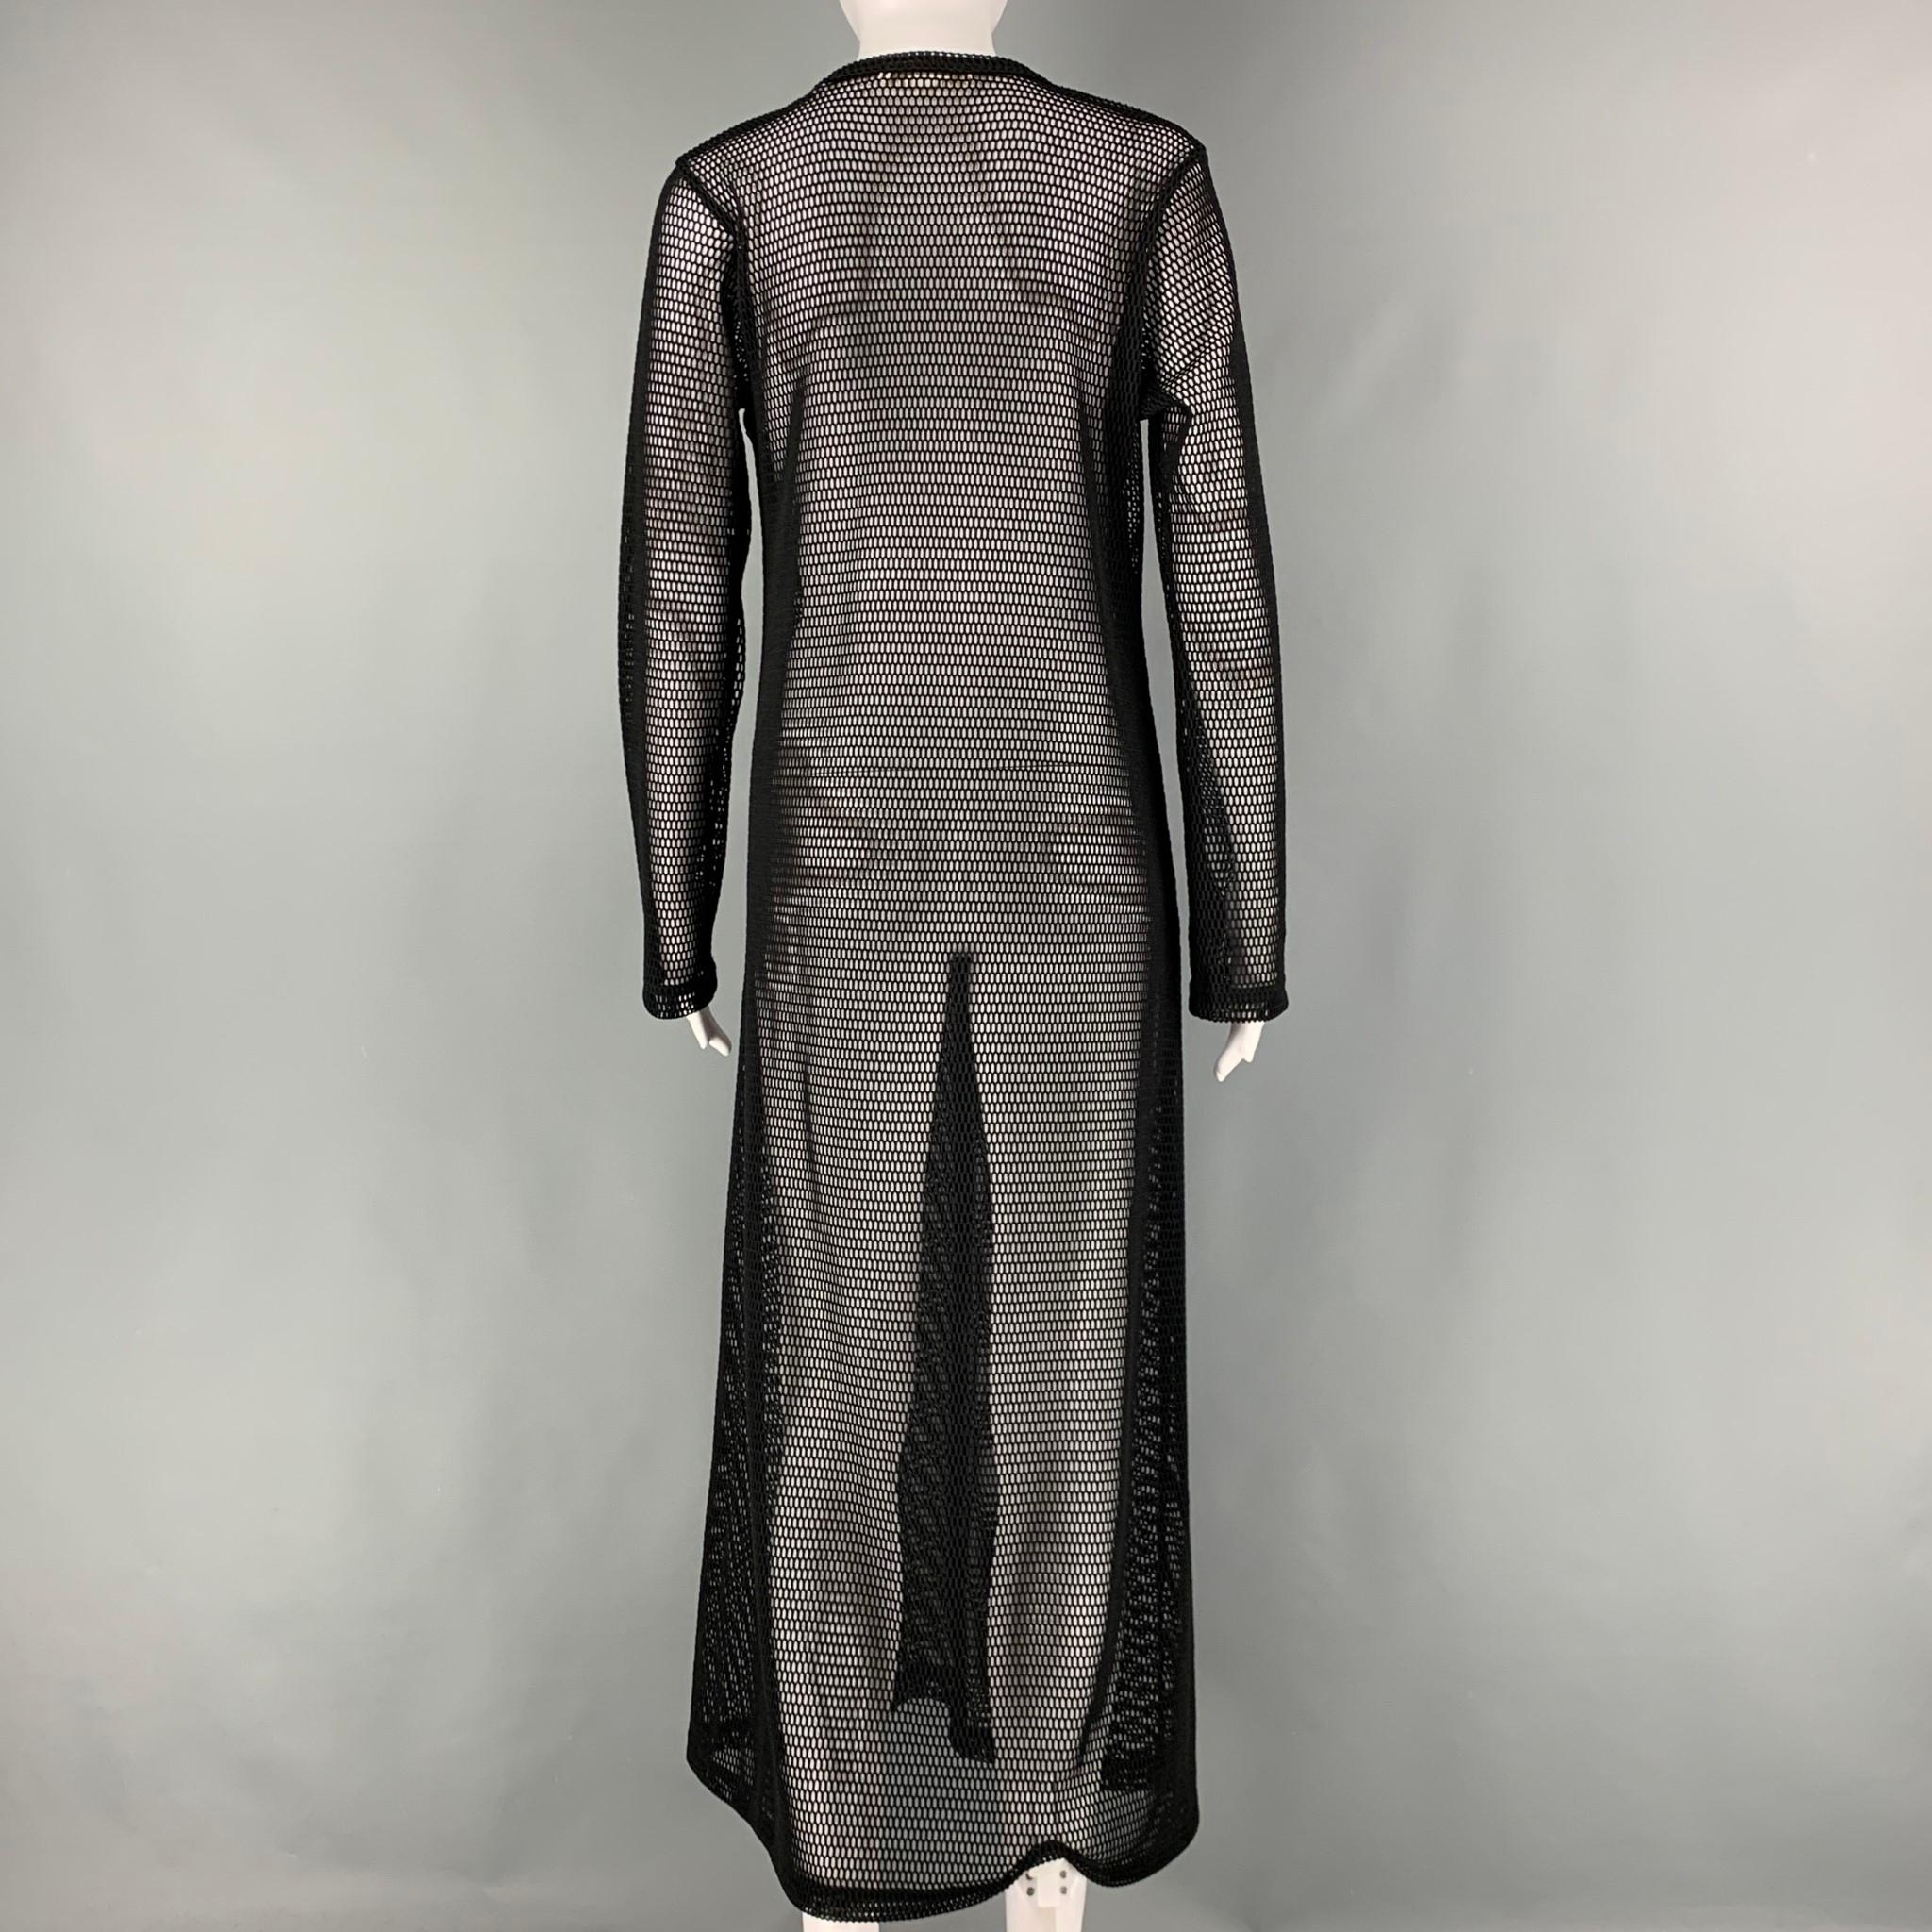 COMME des GARCONS midi dress comes in a black mesh knit material featuring a no lining, and long sleeves.

Very Good Pre-Owned Condition. Fabric Tags Removed.
Marked: L

Measurements:

Shoulder: 15.5 in.
Sleeves: 25 in.
Bust: 40 in.
Waist: 42